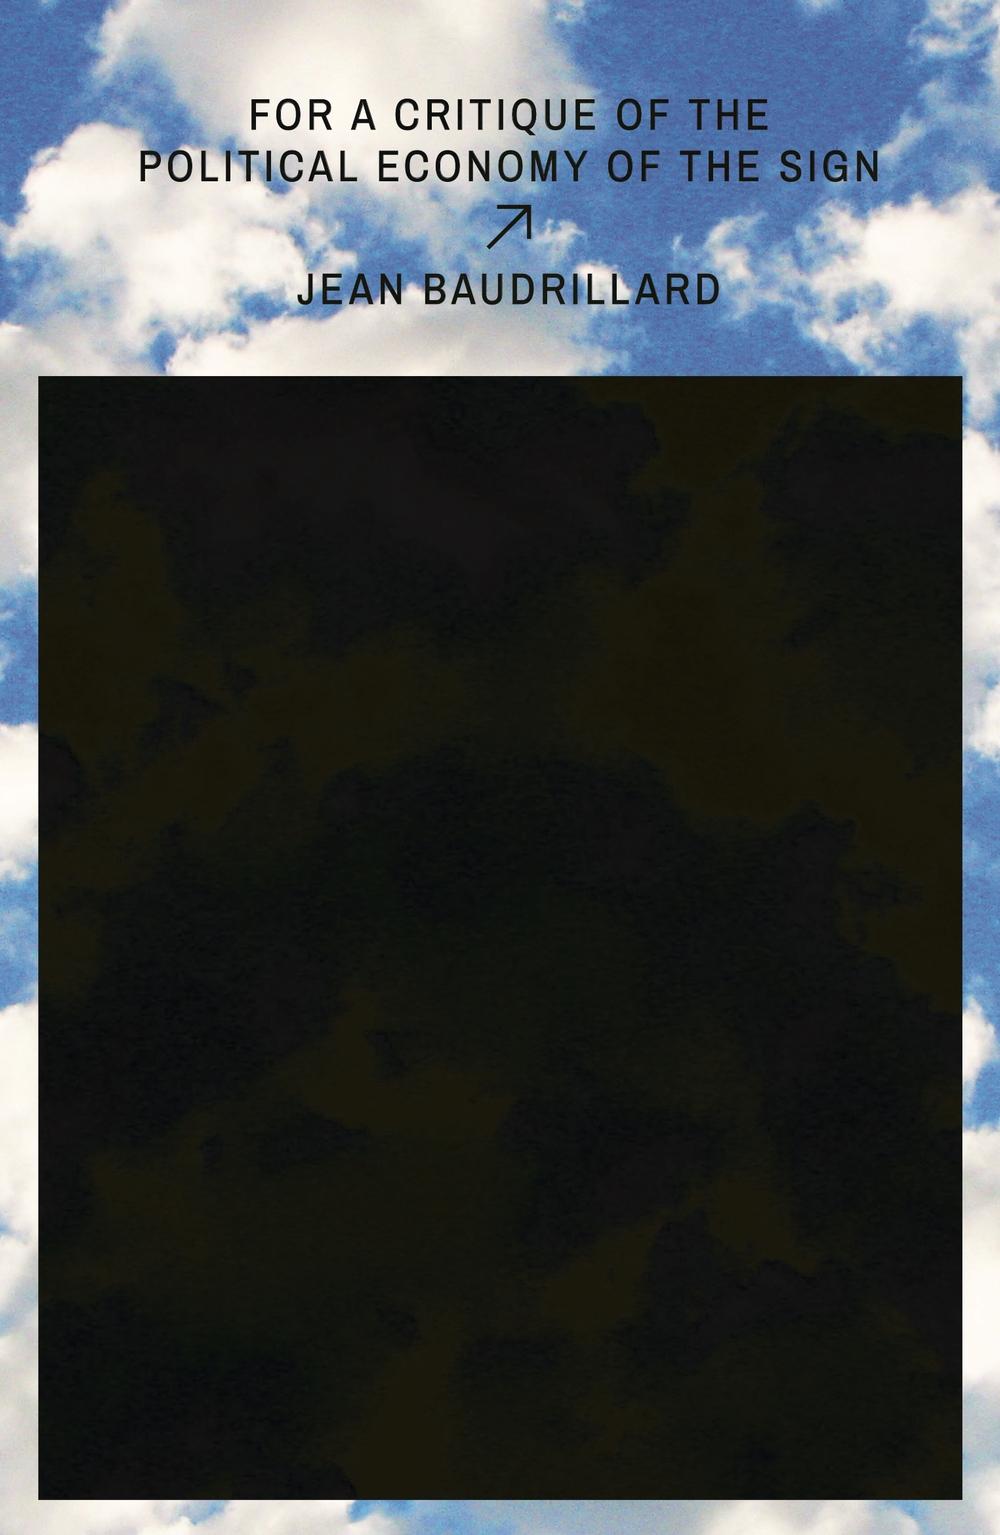 For a Critique of the Political Economy of the Sign - Jean Baudrillard